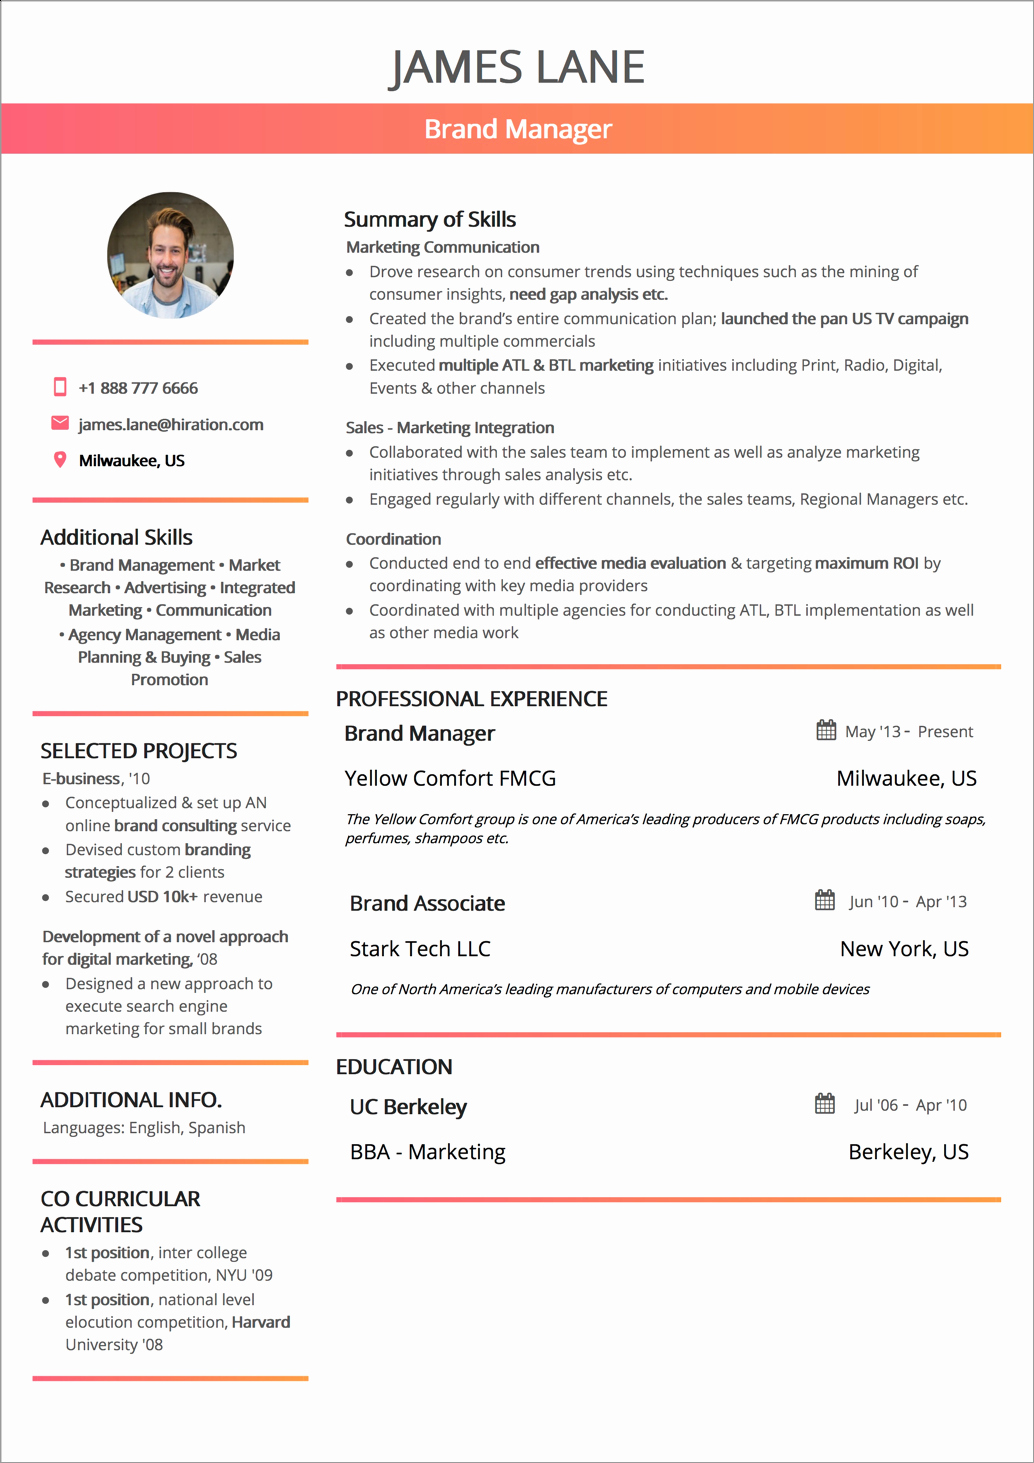 Best Resume format Elegant Resume format 2019 Guide with Examples